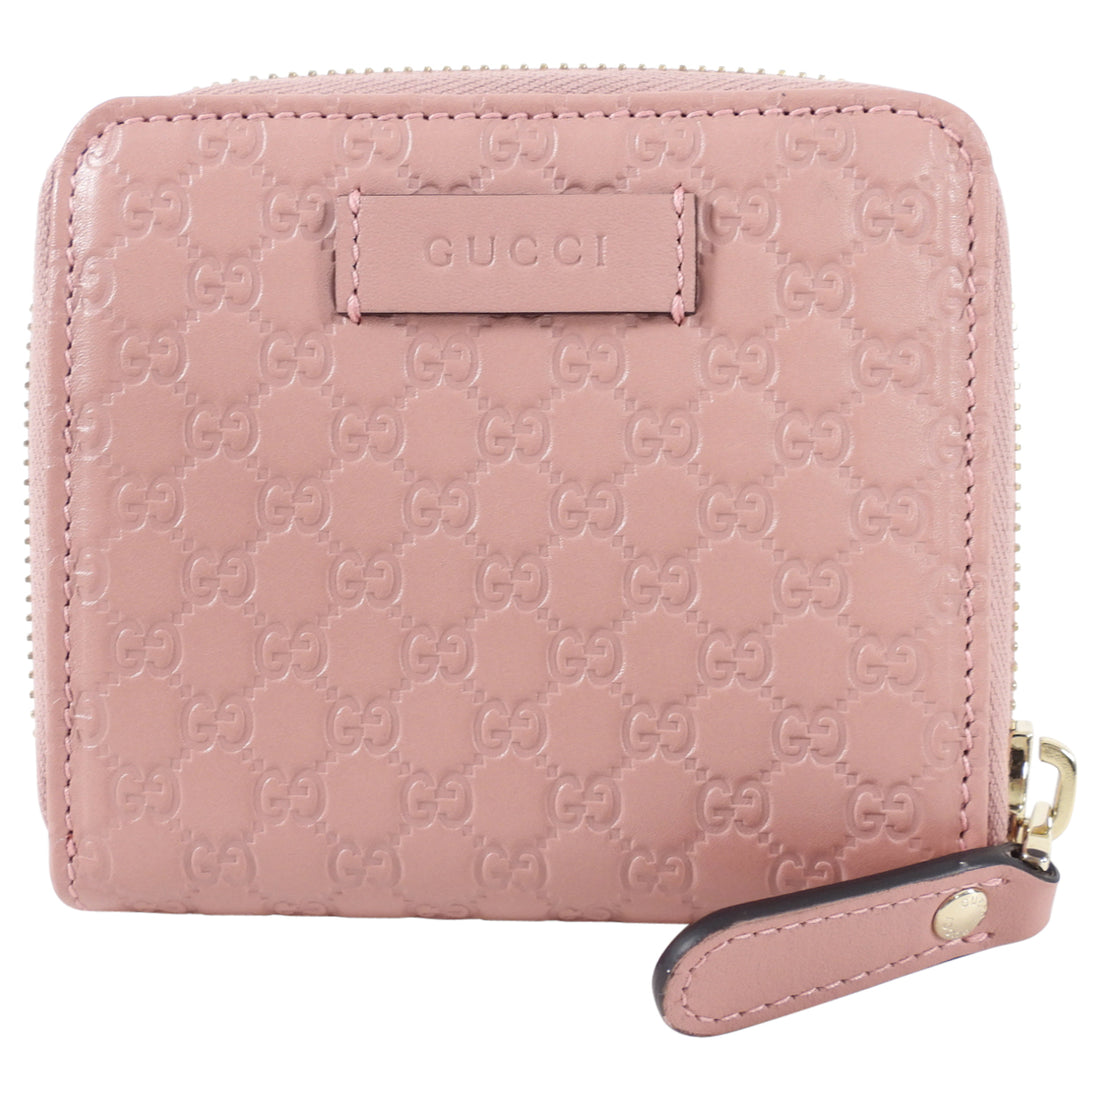 Gucci Pink Micro Guccissima Leather Compact Wallet 